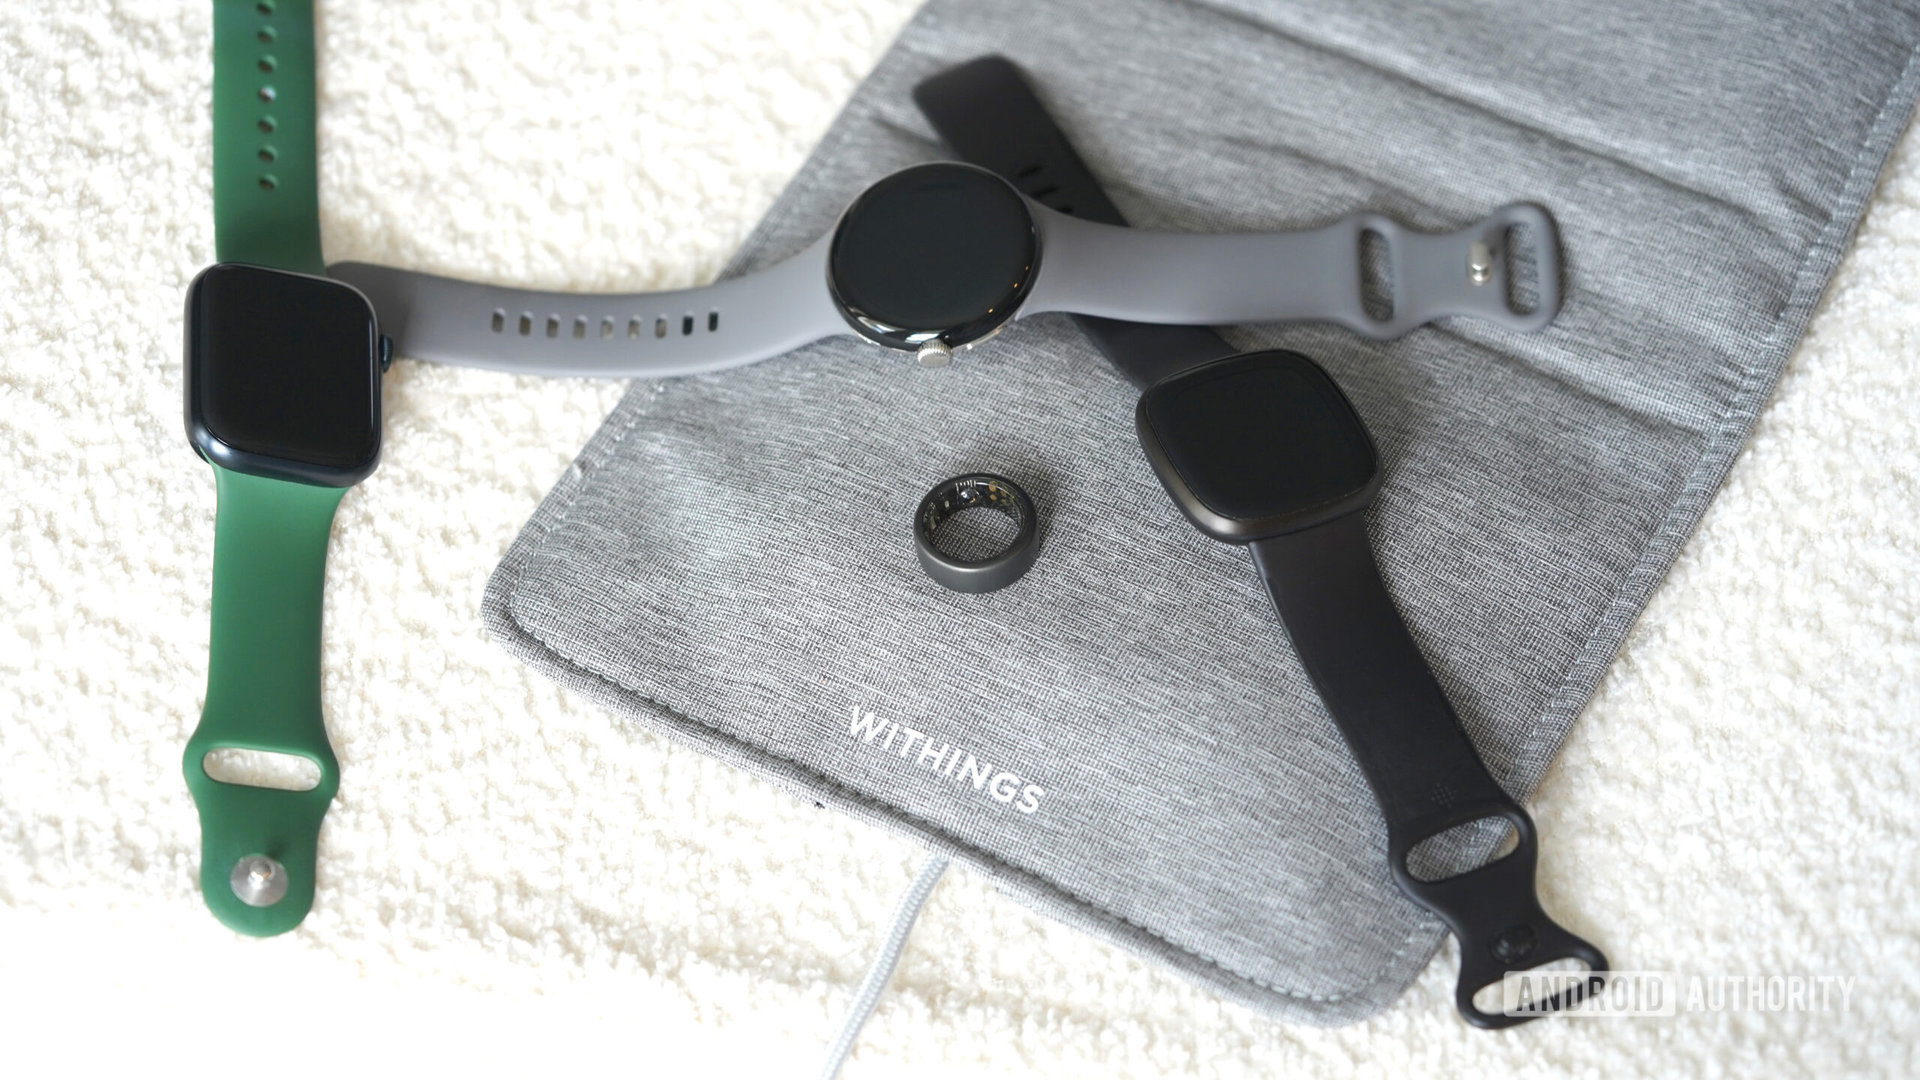 A variety of sleep tracking devices, including the Withings Sleep tracking mat, rest on a cozy boucle bench.